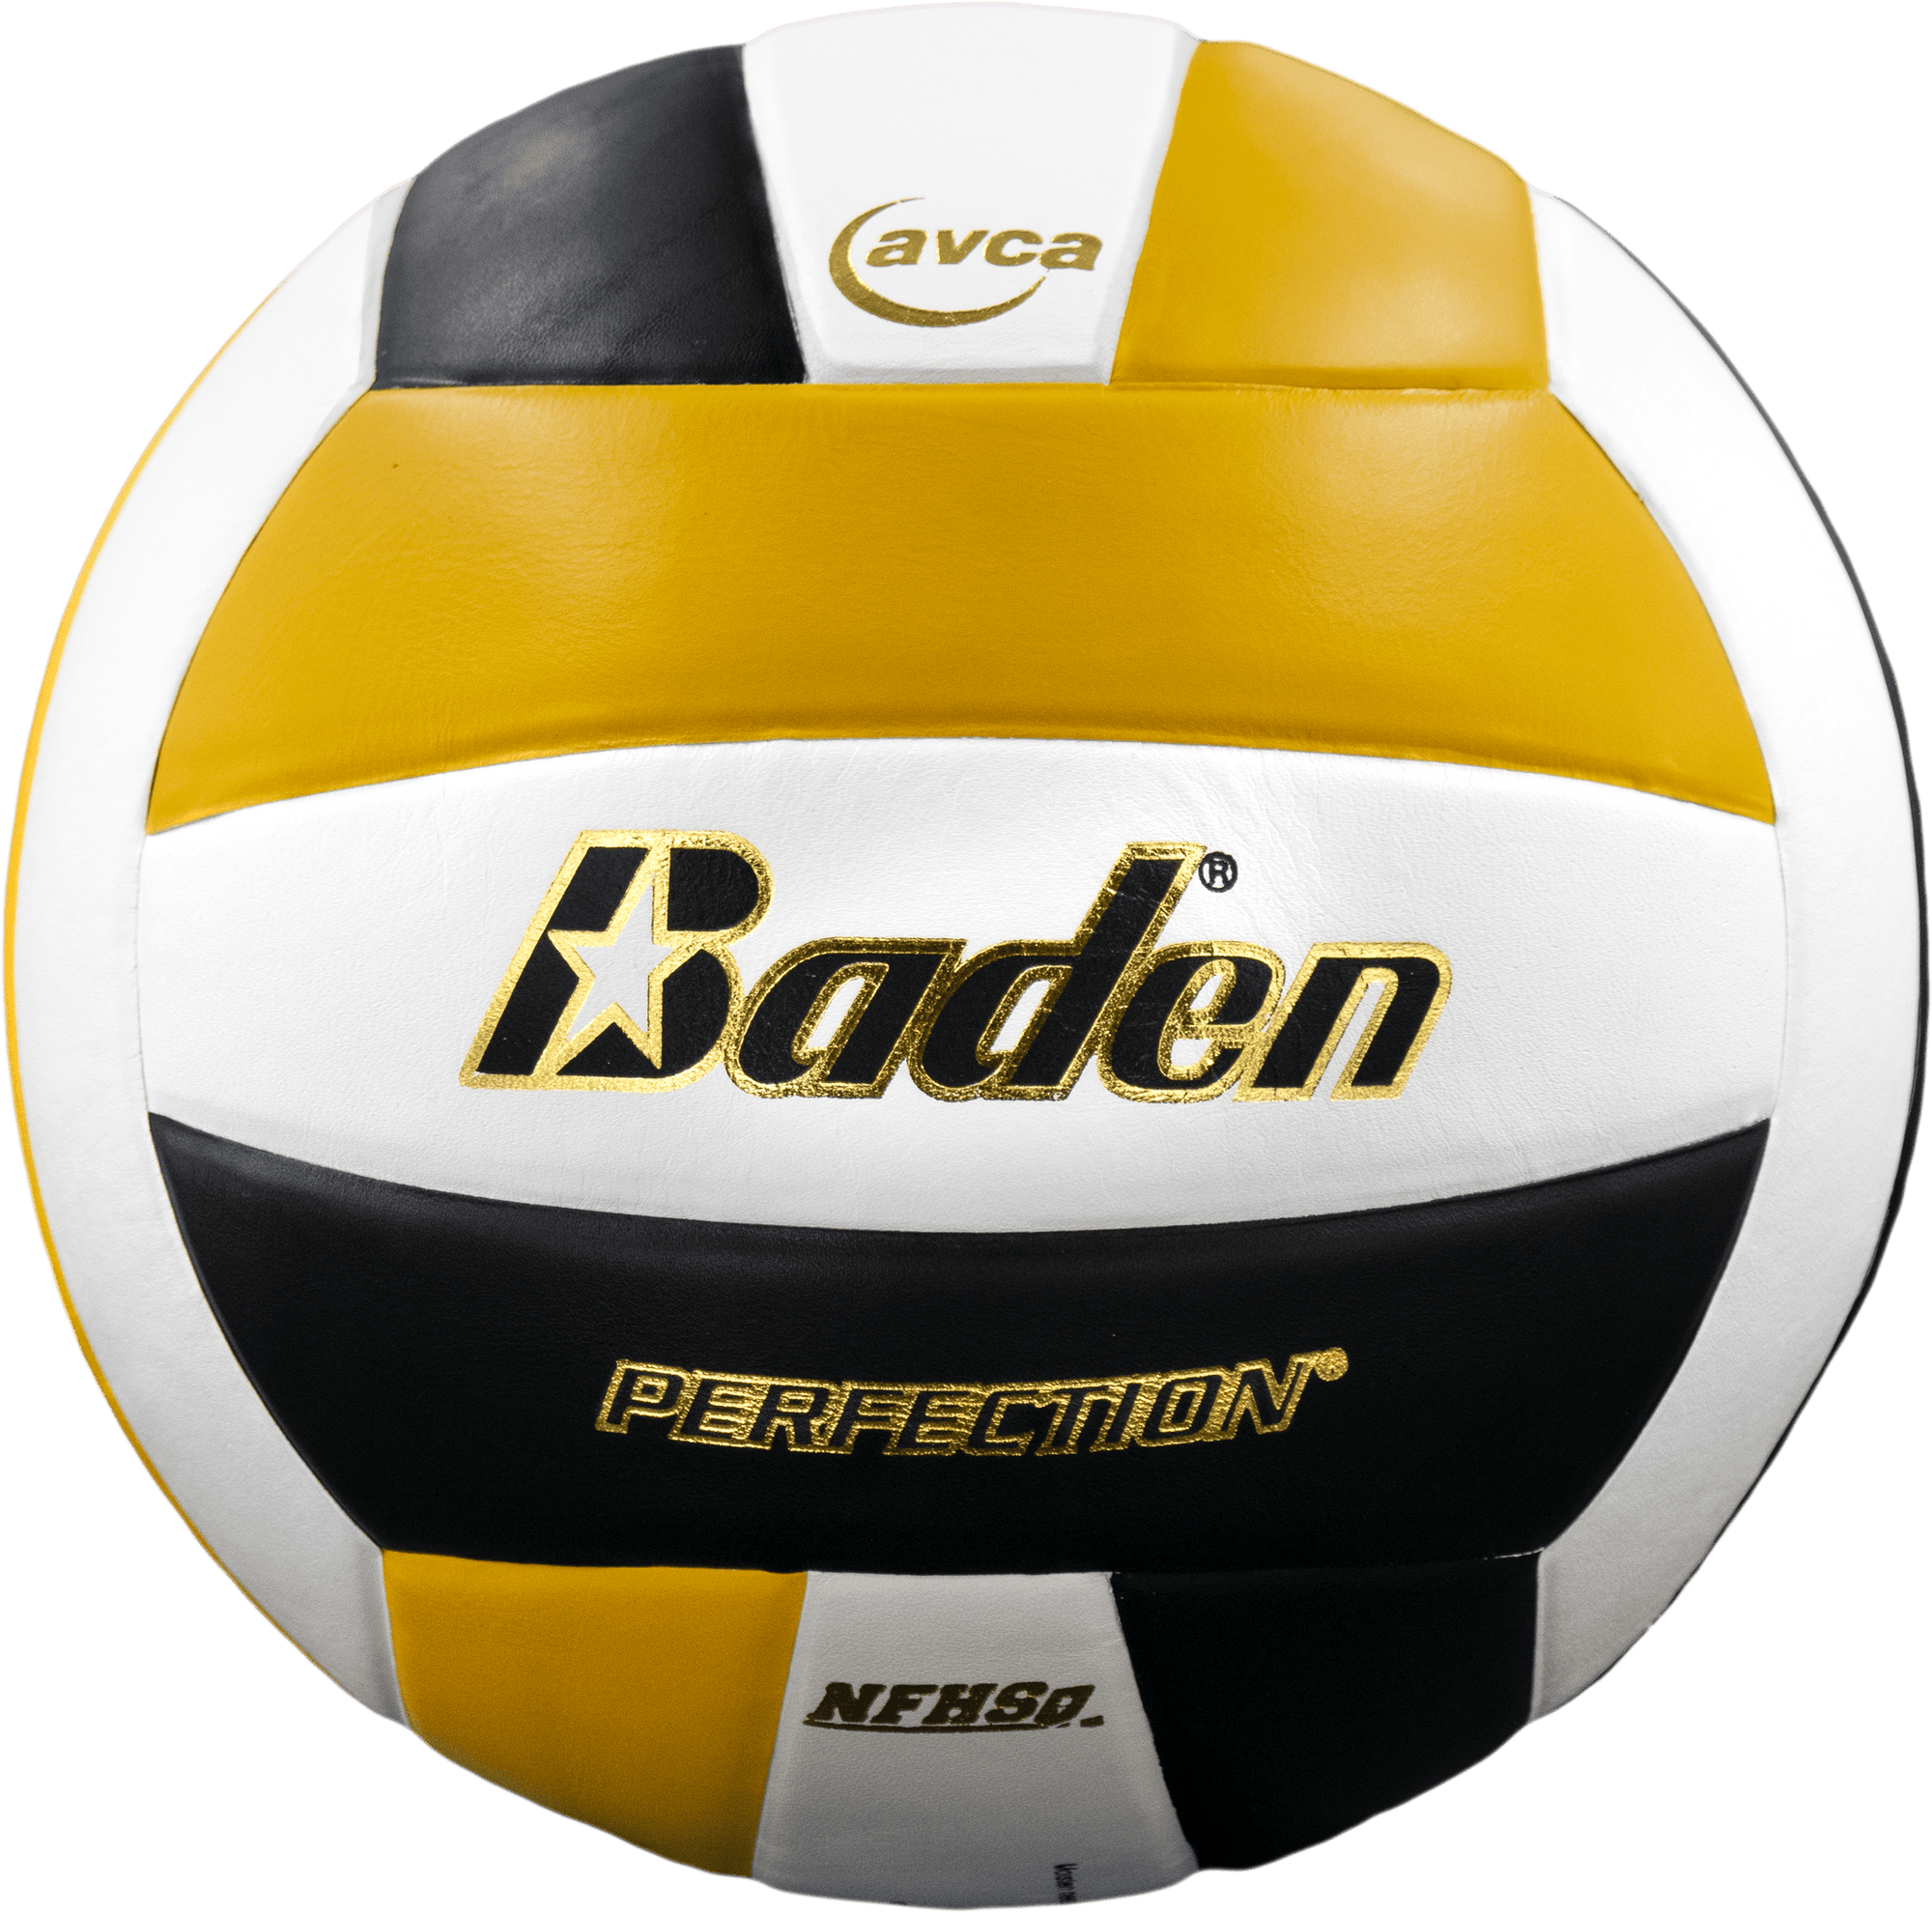 Baden Volleyball Leather Perfection - Sports